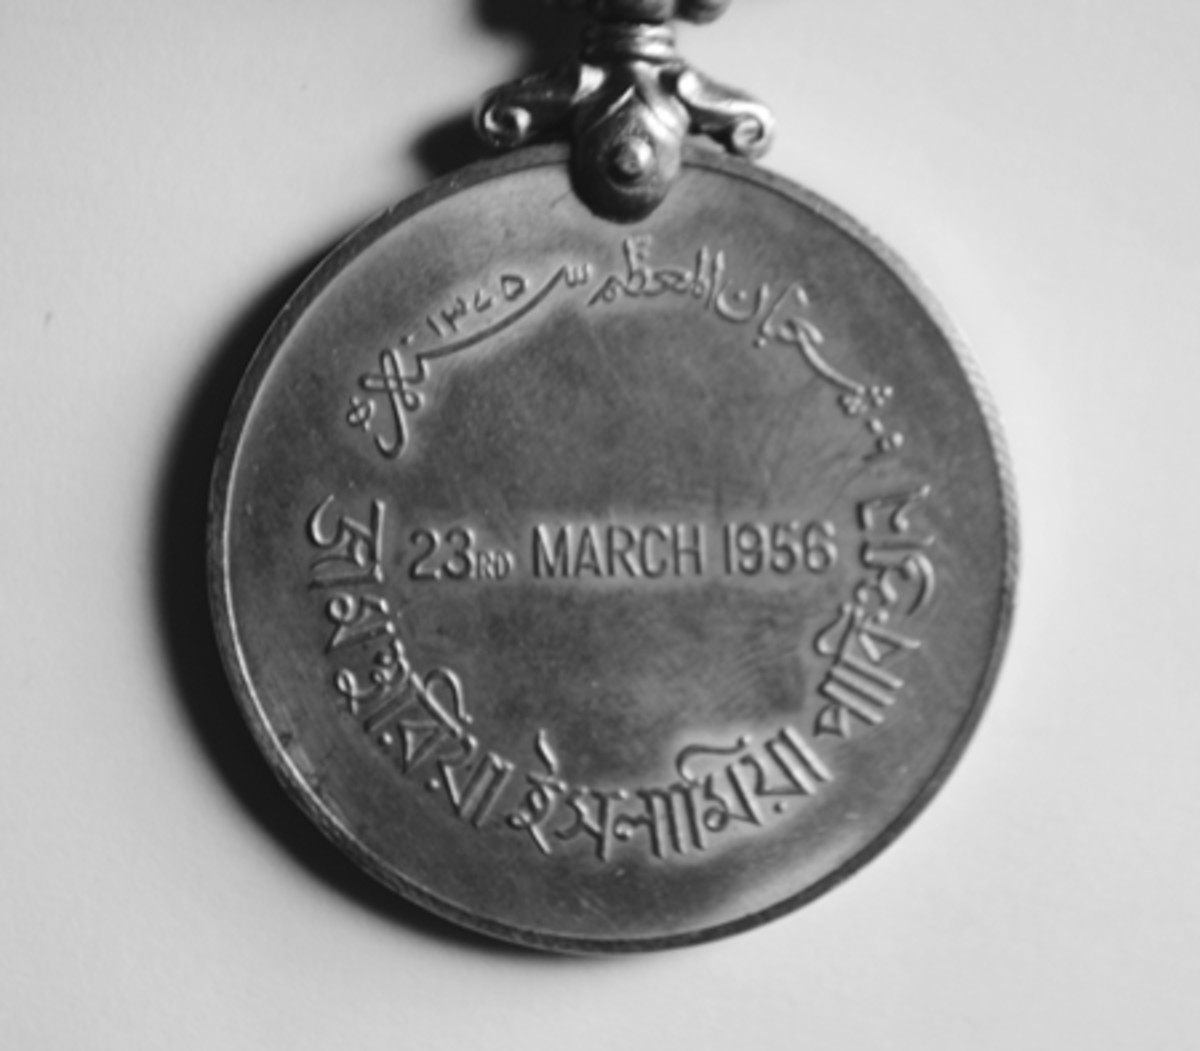 Reverse of Pakistan Independence Medal with date in full to cover the event.